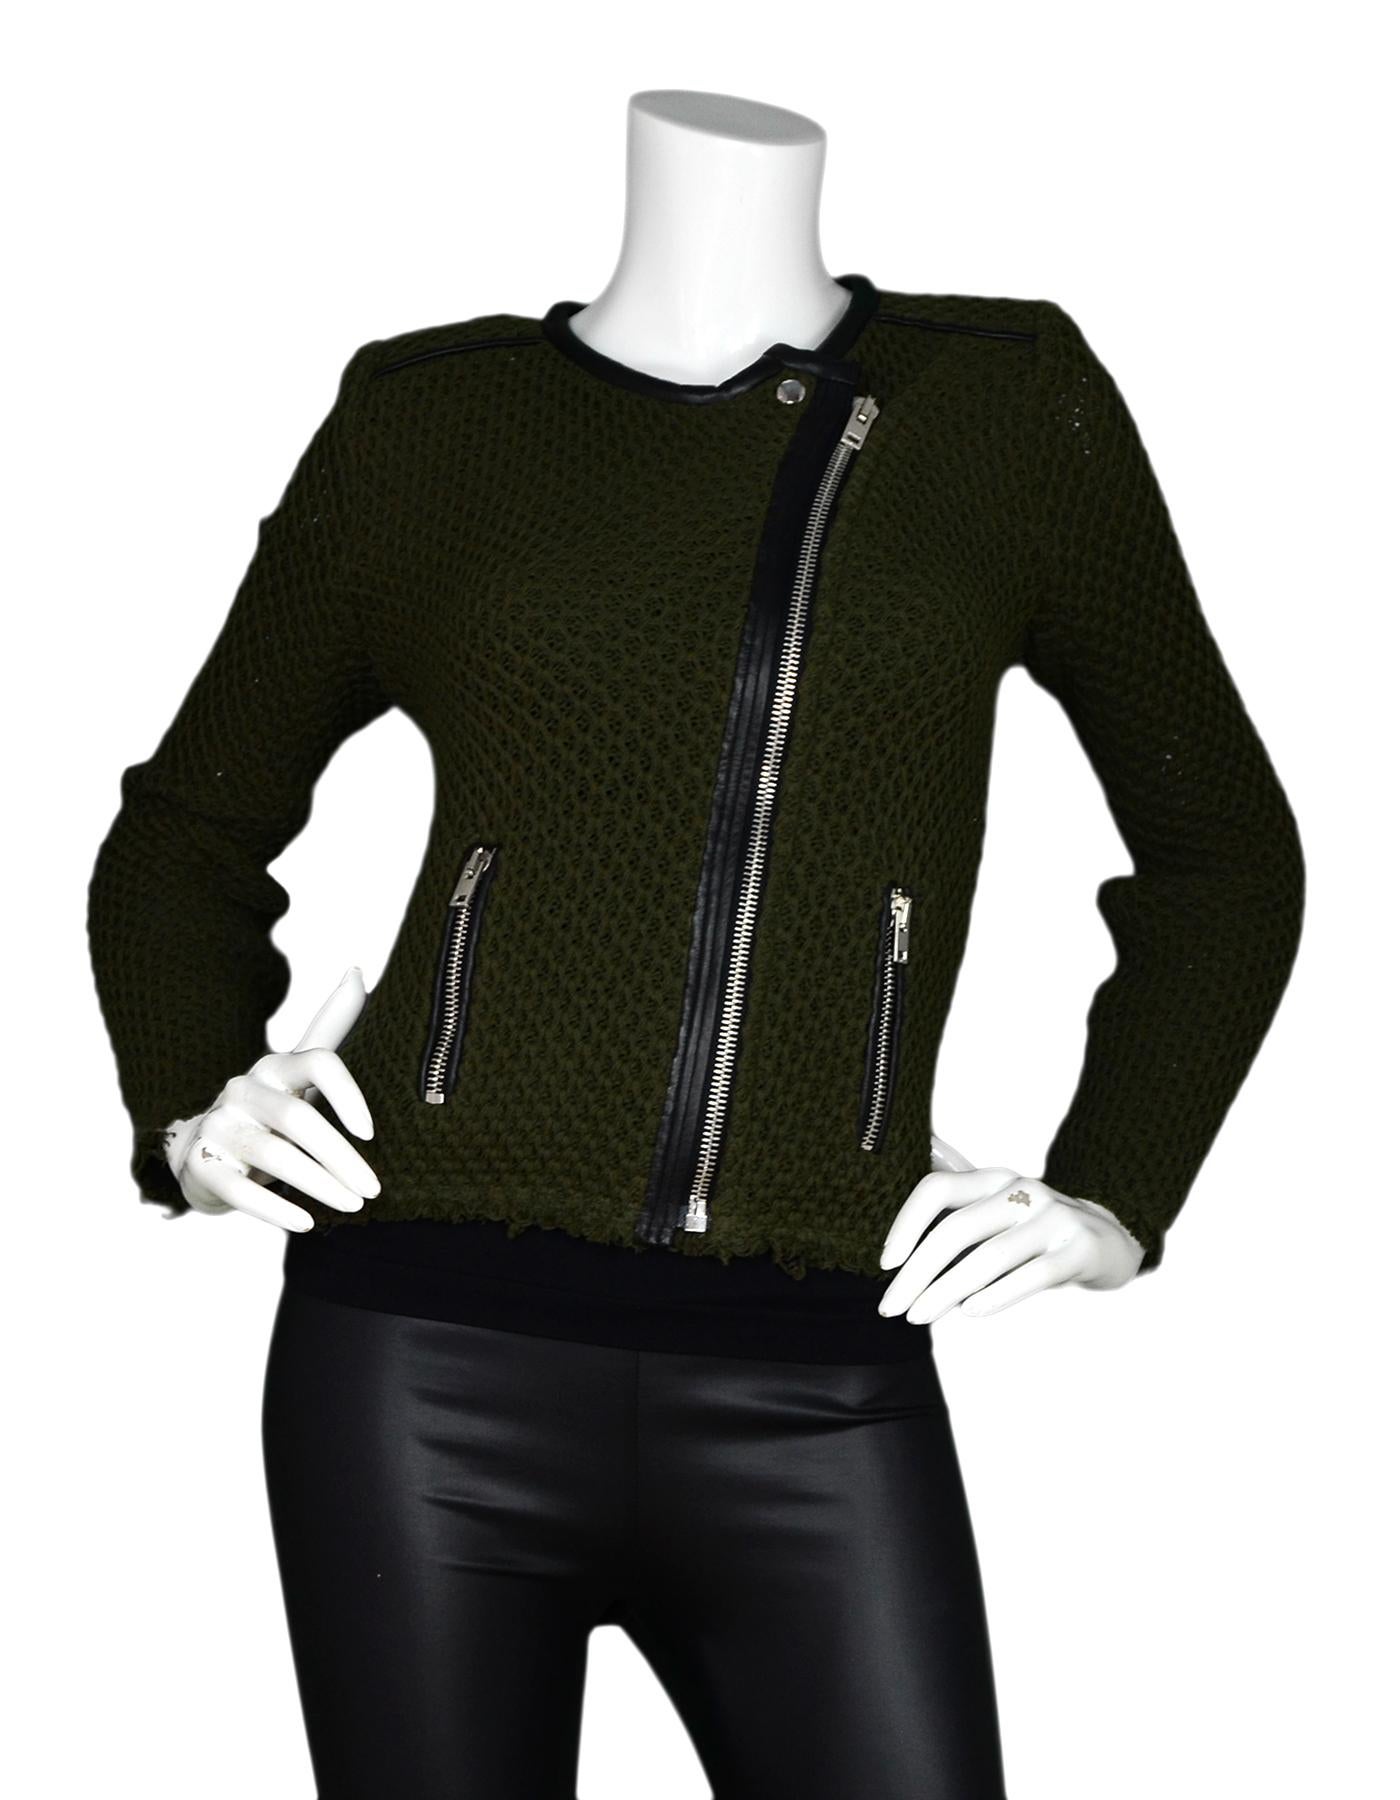 IRO Green Knit Miali Asymmetrical Zip Jacket W/ Black Leather Trim & Raw Hem Sz 0

Made In: Poland
Color: Khaki green
Materials: 100% cotton, lamb leather
Pocket Lining: 65% polyester, 35% cotton
Opening/Closure: Asymmetrical zipper
Overall